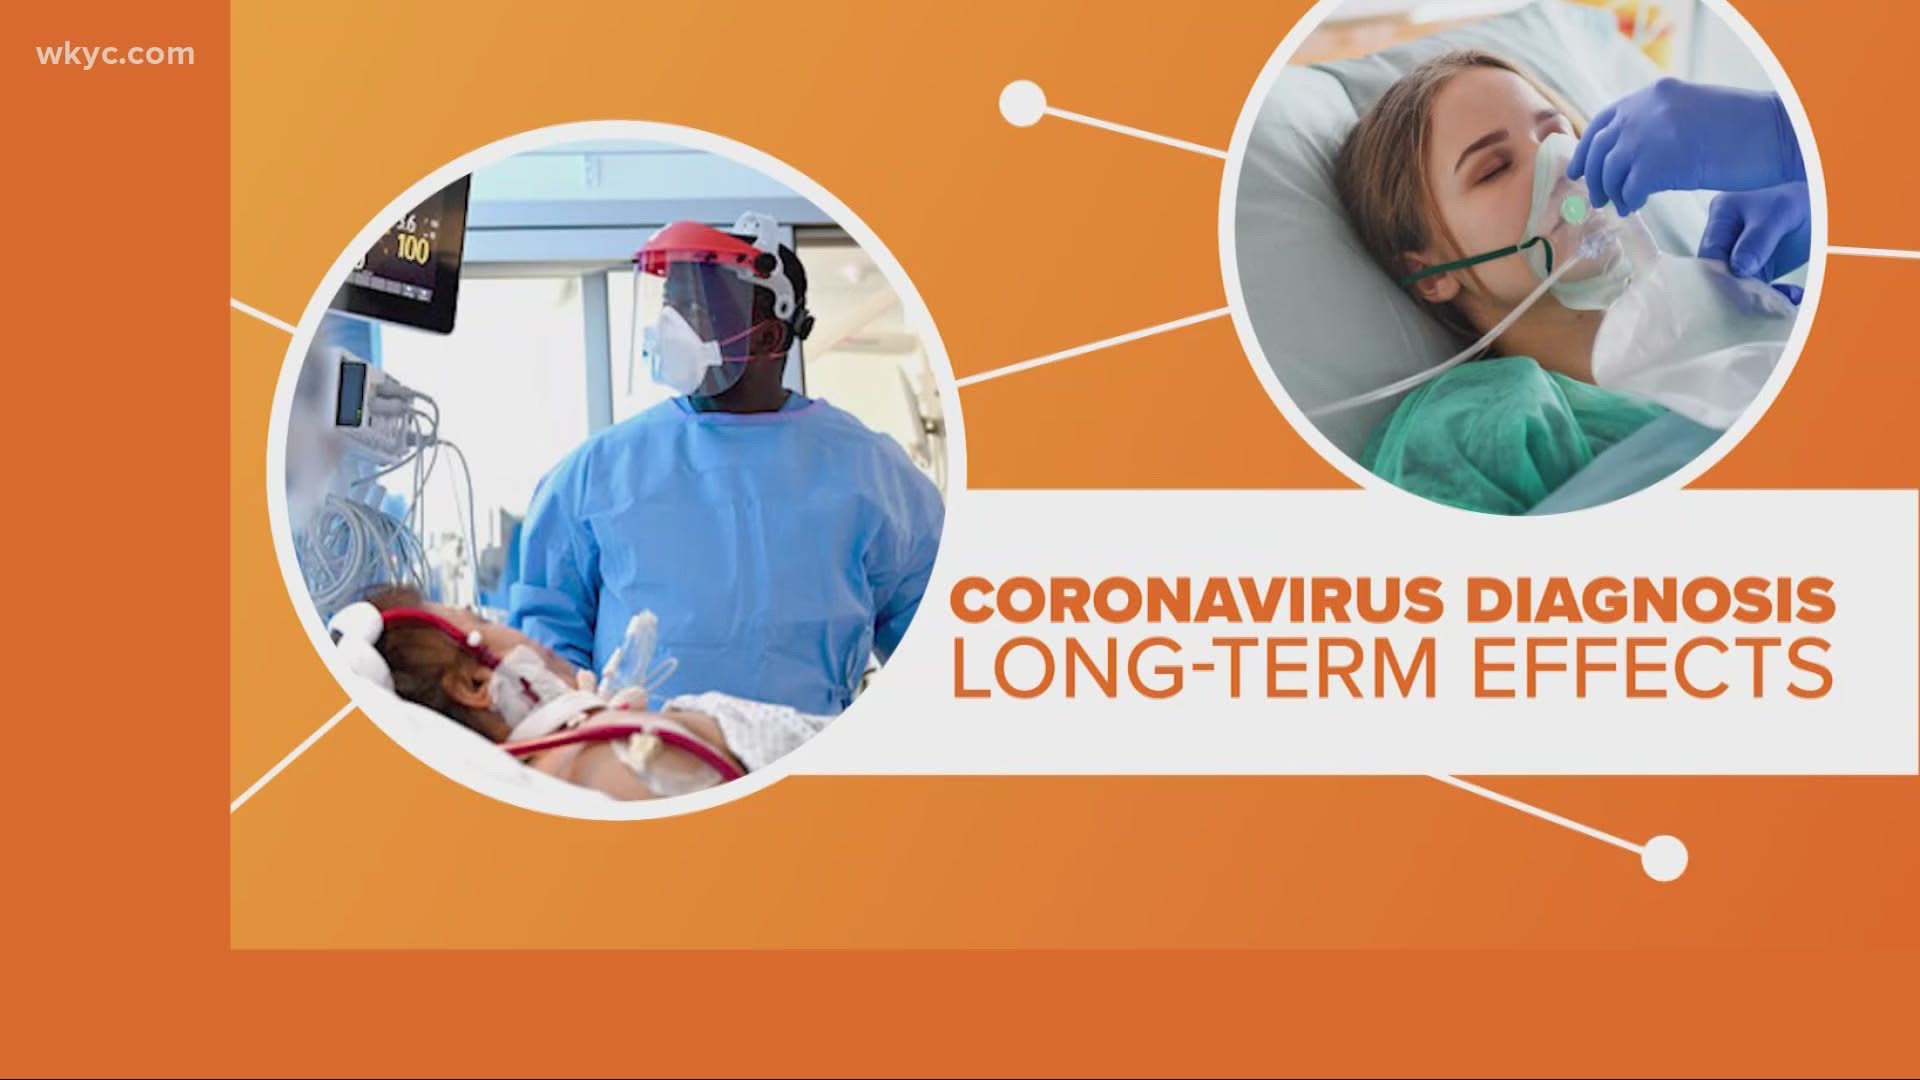 Here's what experts are saying about the long-term health effects of COVID-19 as we learn more about the coronavirus.